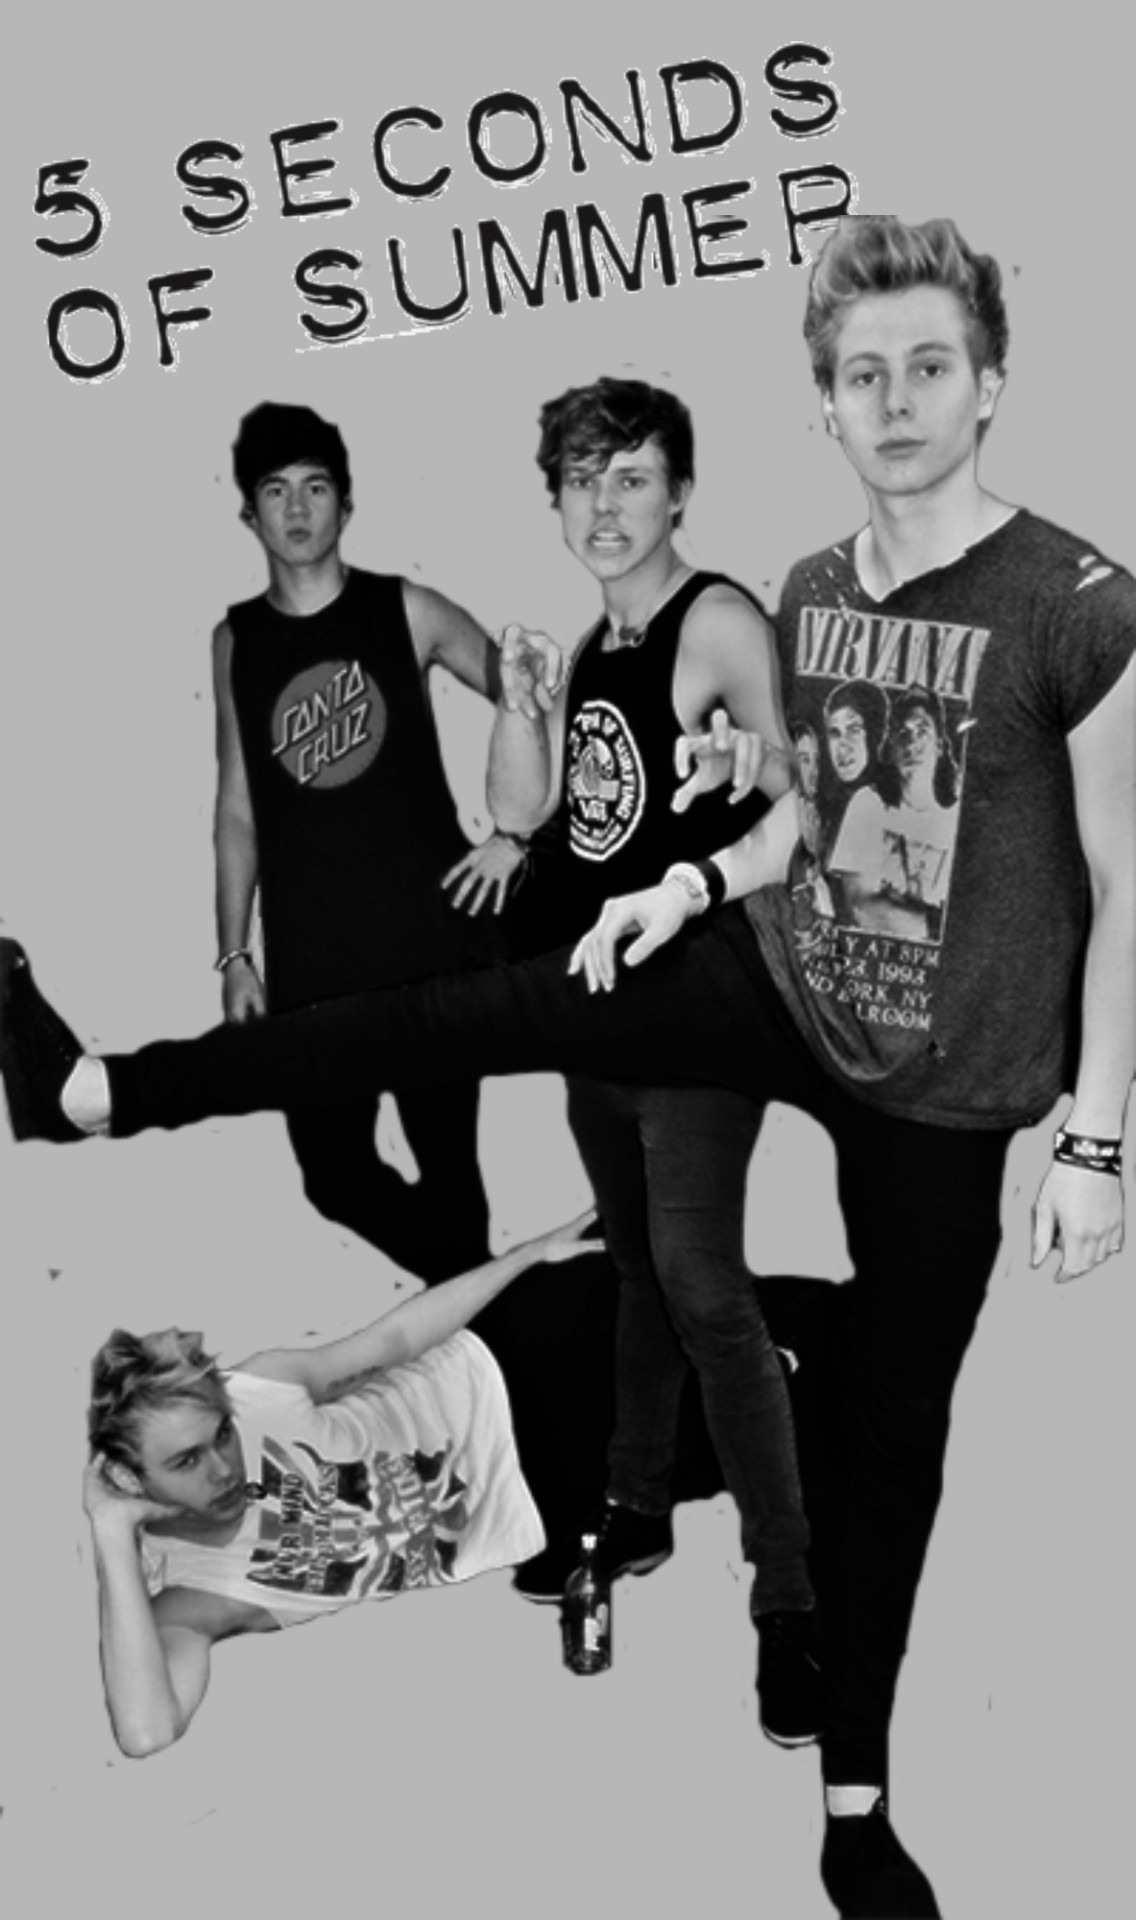 1136x1920 New Black and White 5sos Lockscreen requested by Anon (I do not own any of